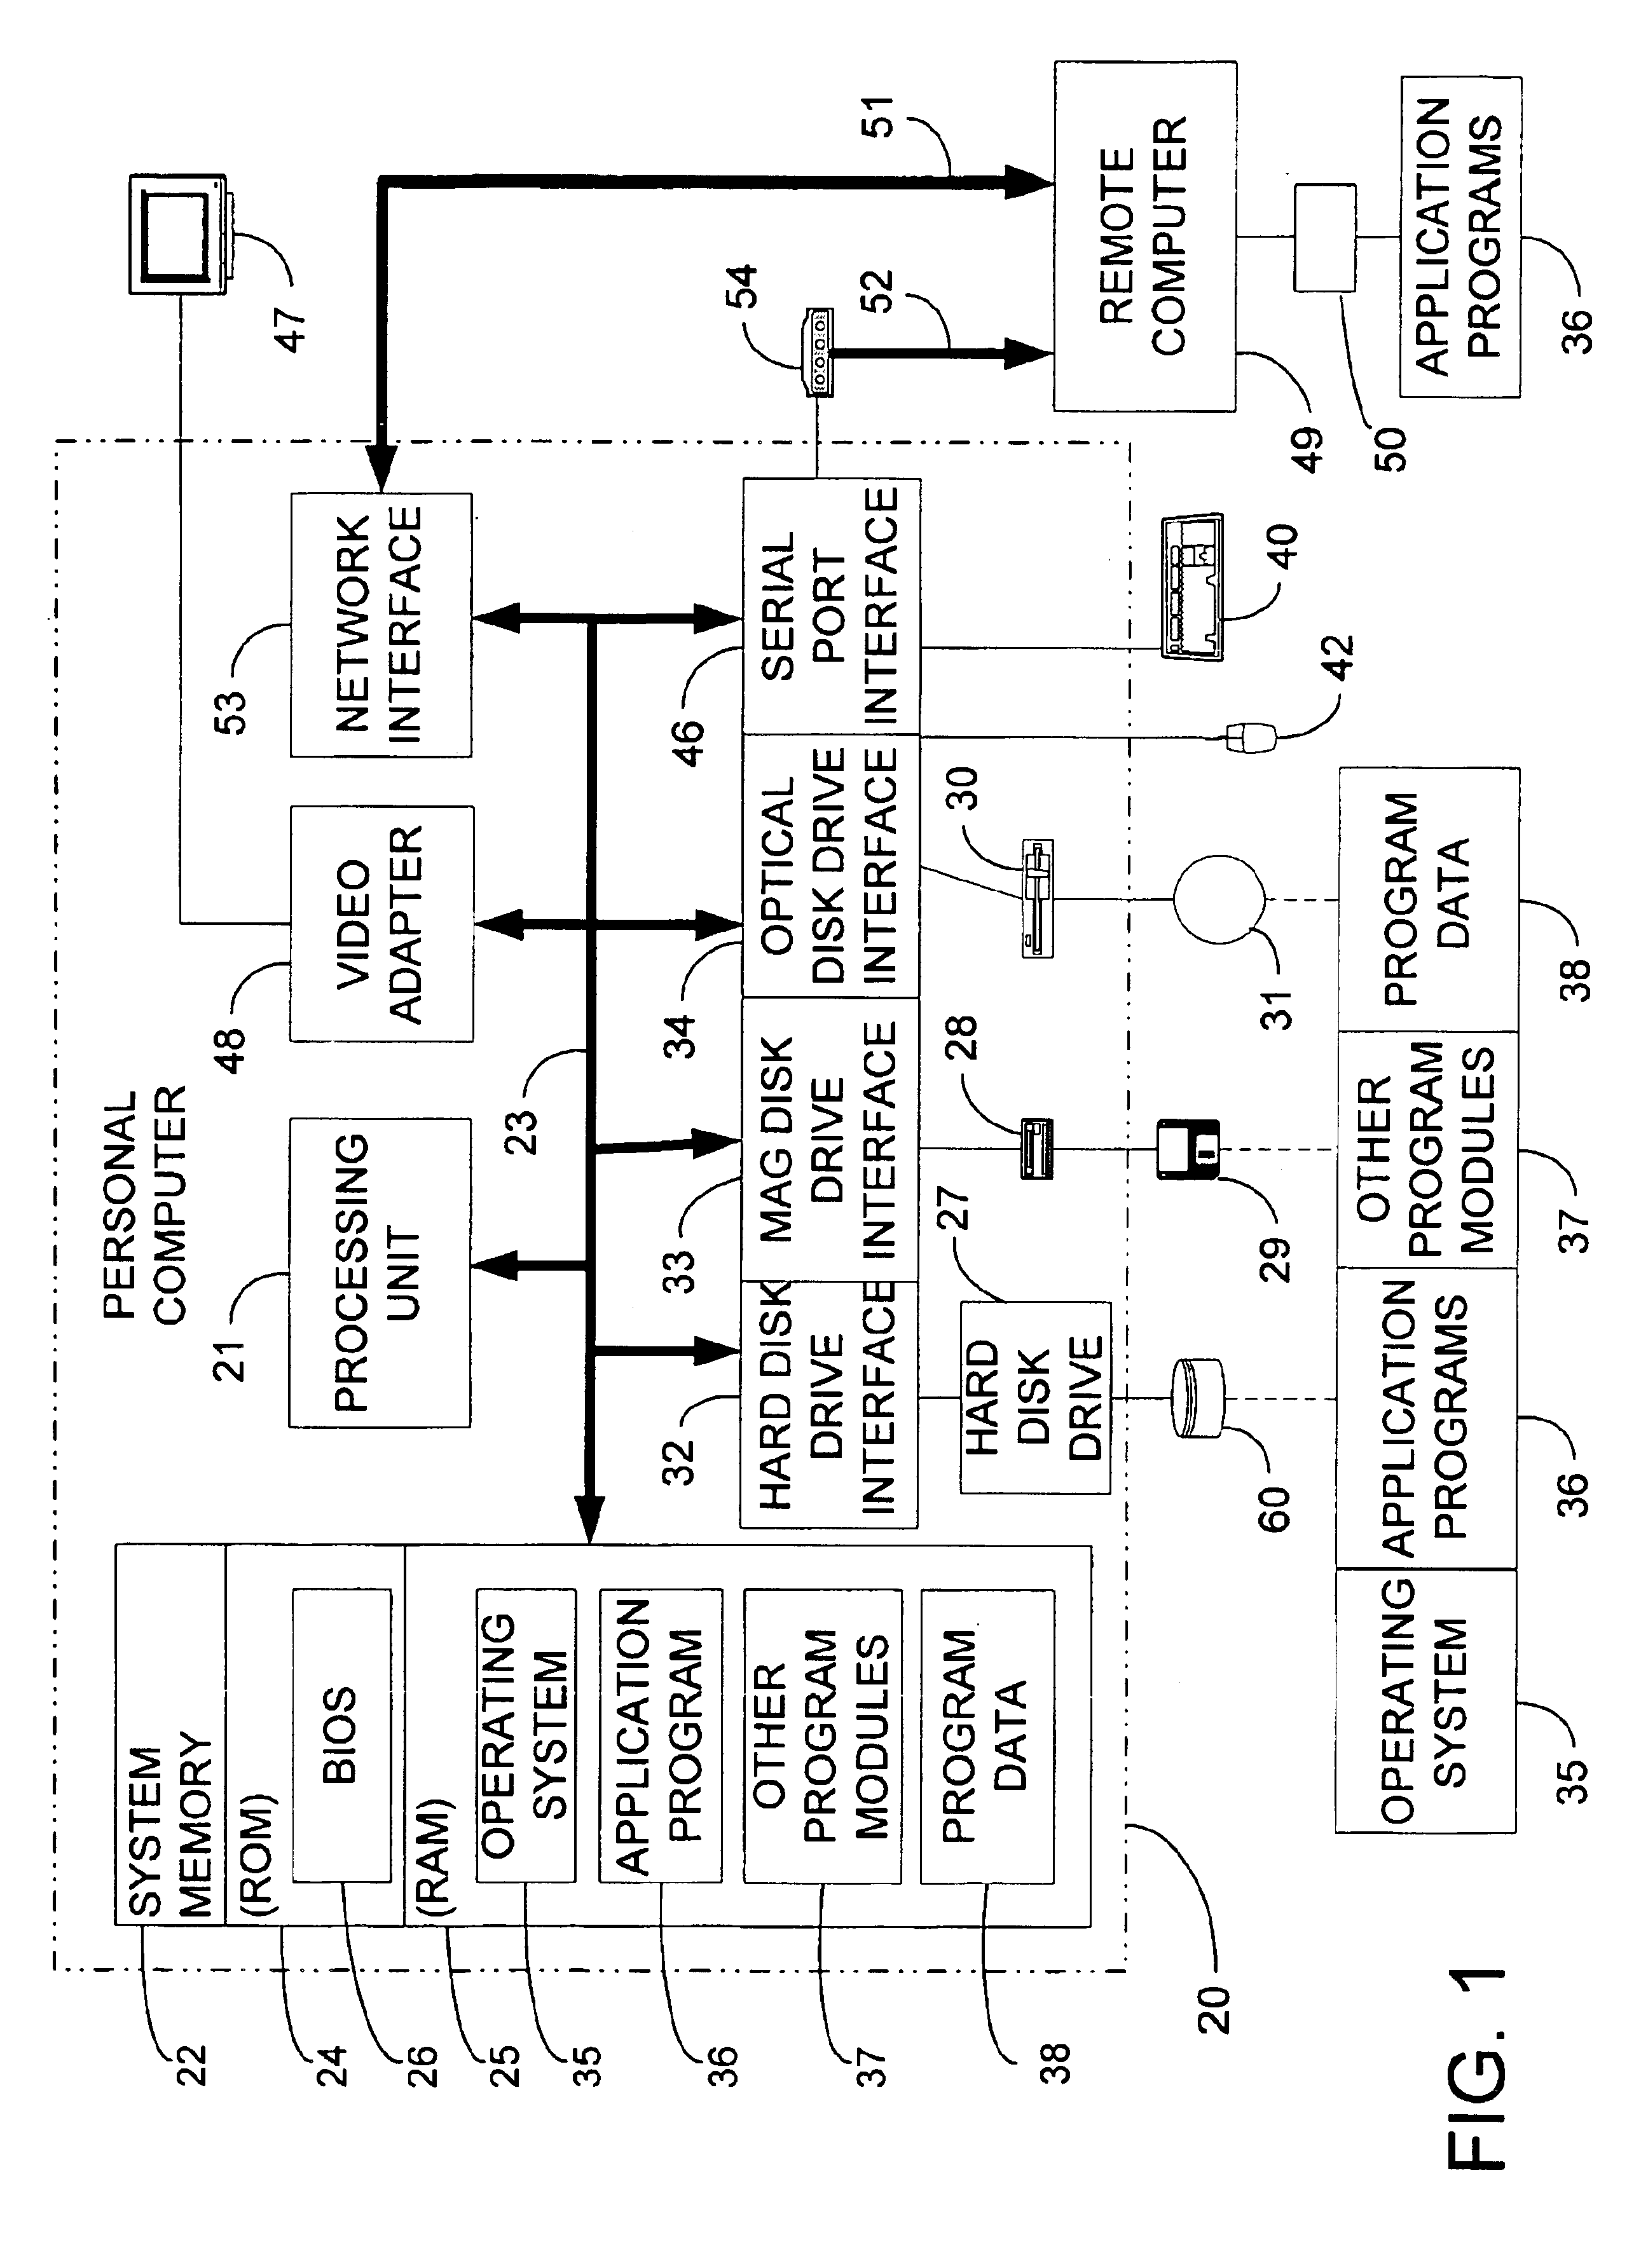 System and method of providing replaceable and extensible user interface for the installation of a suite of applications